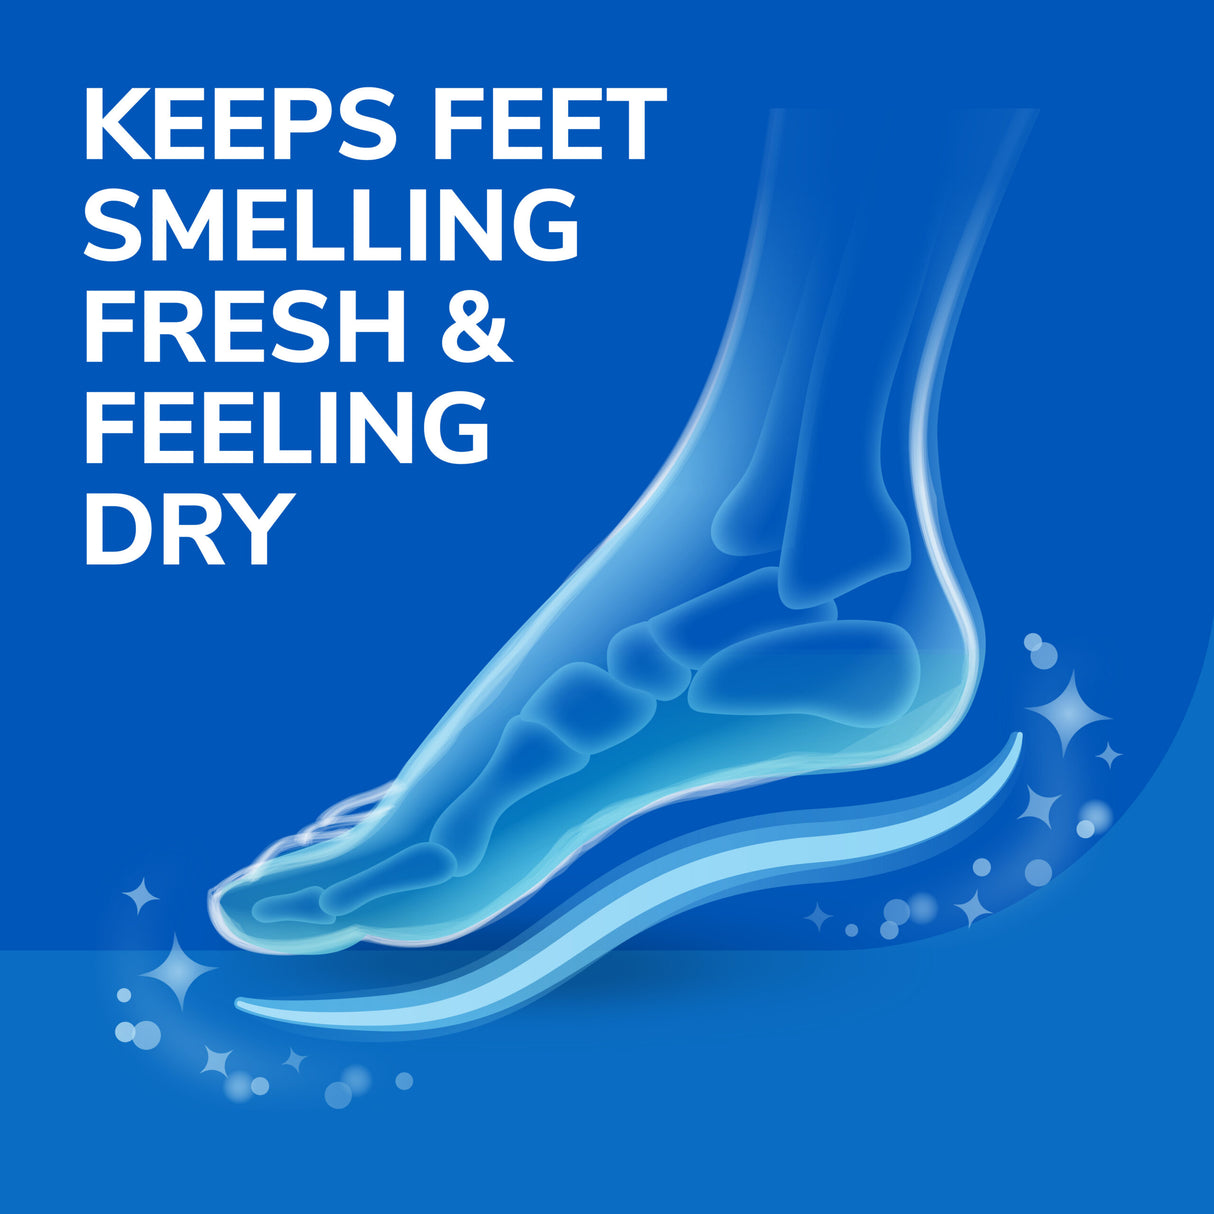 image of keeps feet smelling fresh and feeling dry